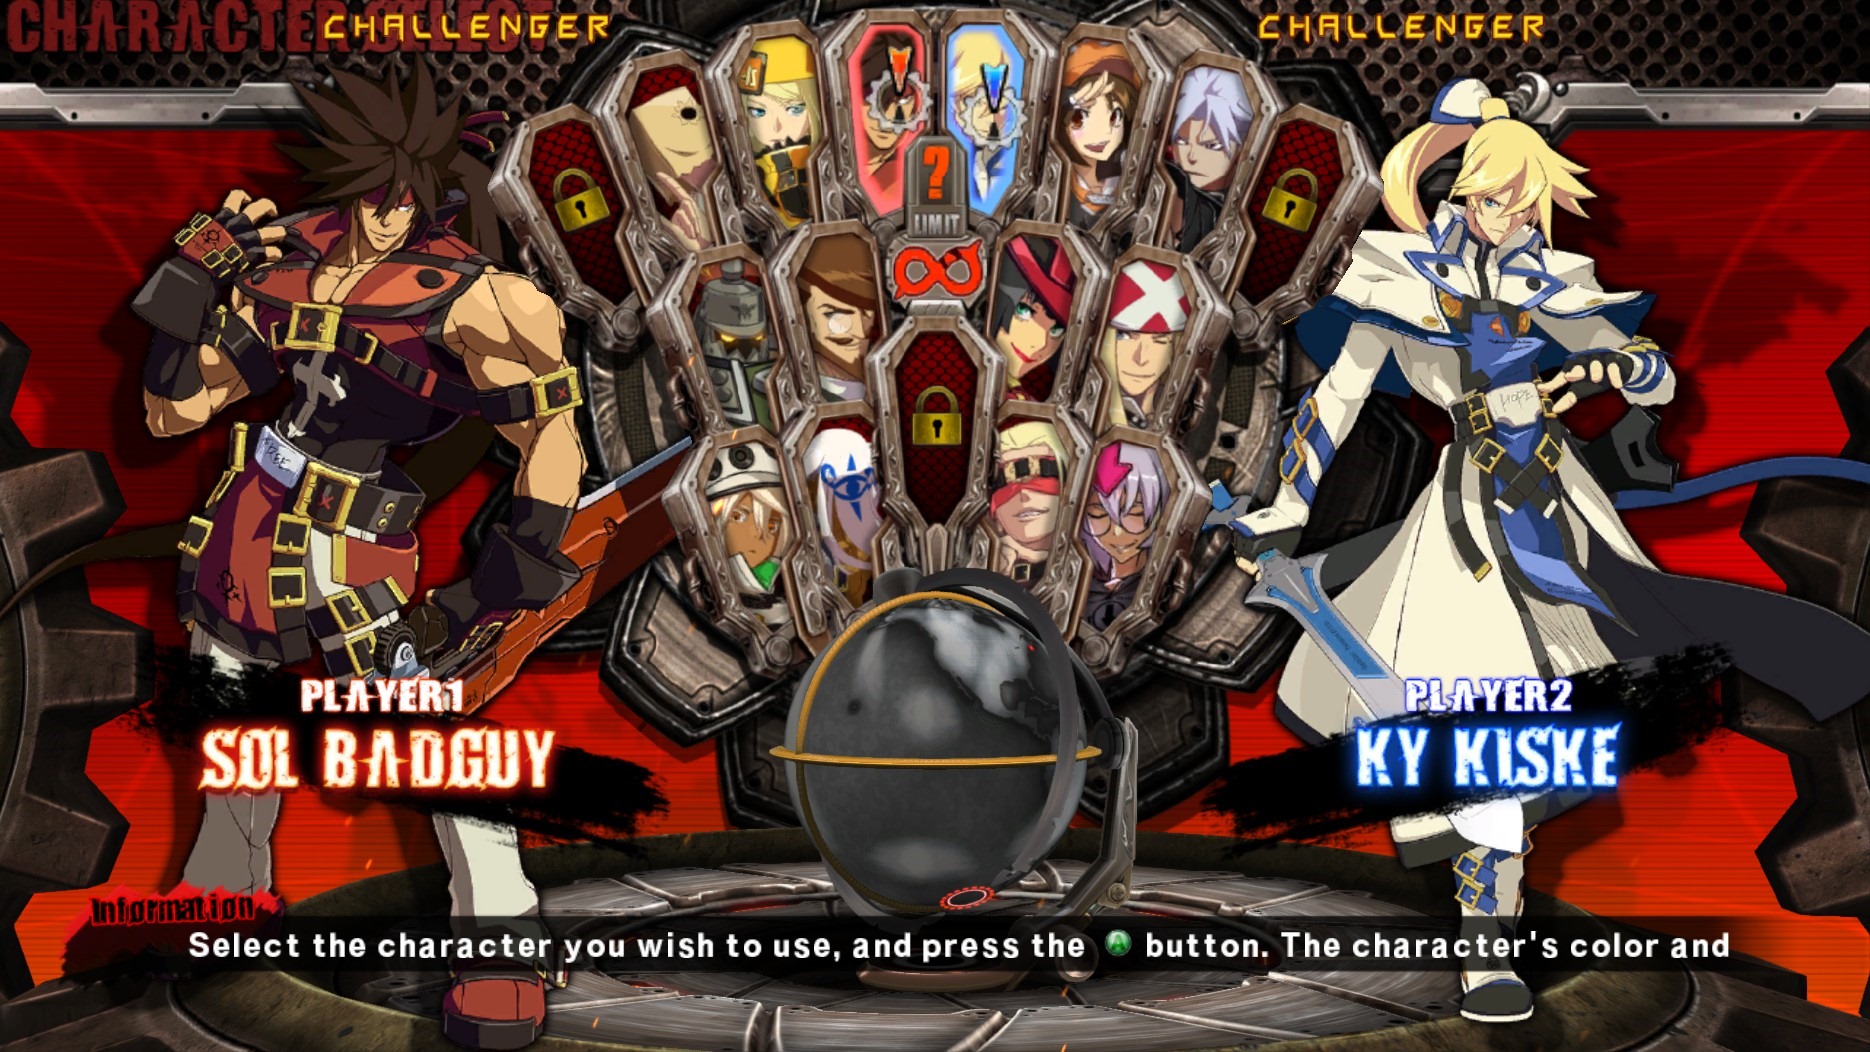 Guilty Gear Xrd Sign Strikes Steam On Wednesday Siliconera